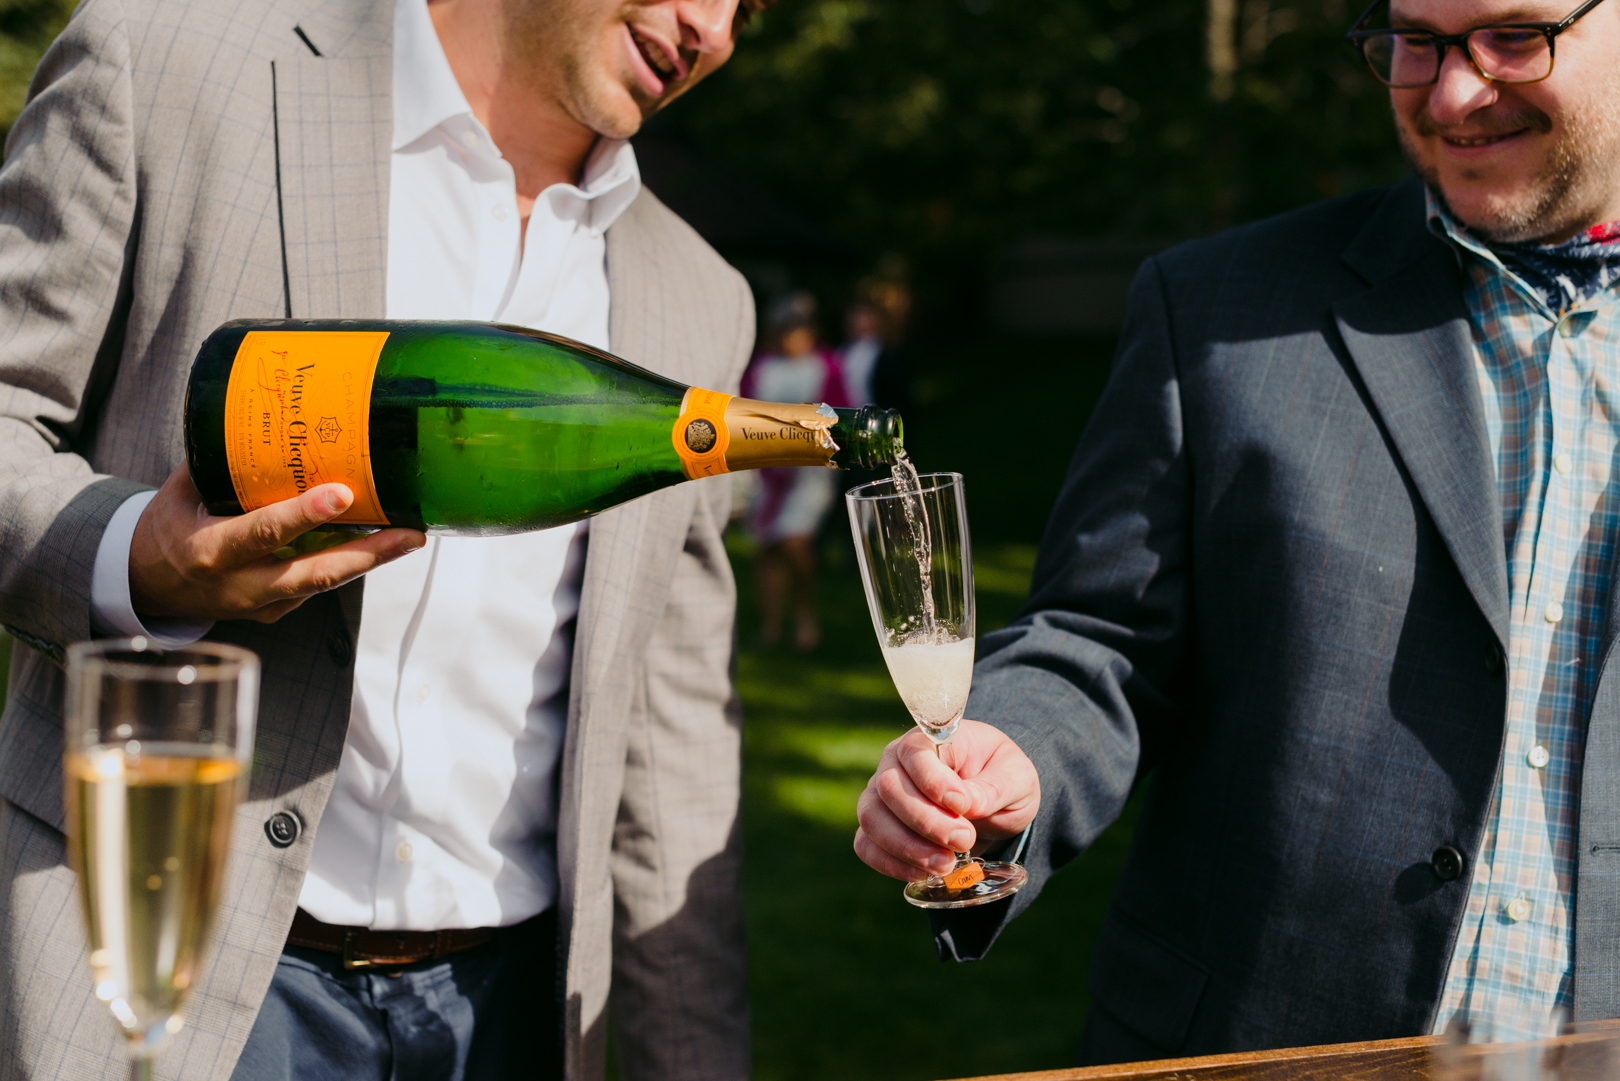 brother of the groom pouring Veuve Clicquot champagne